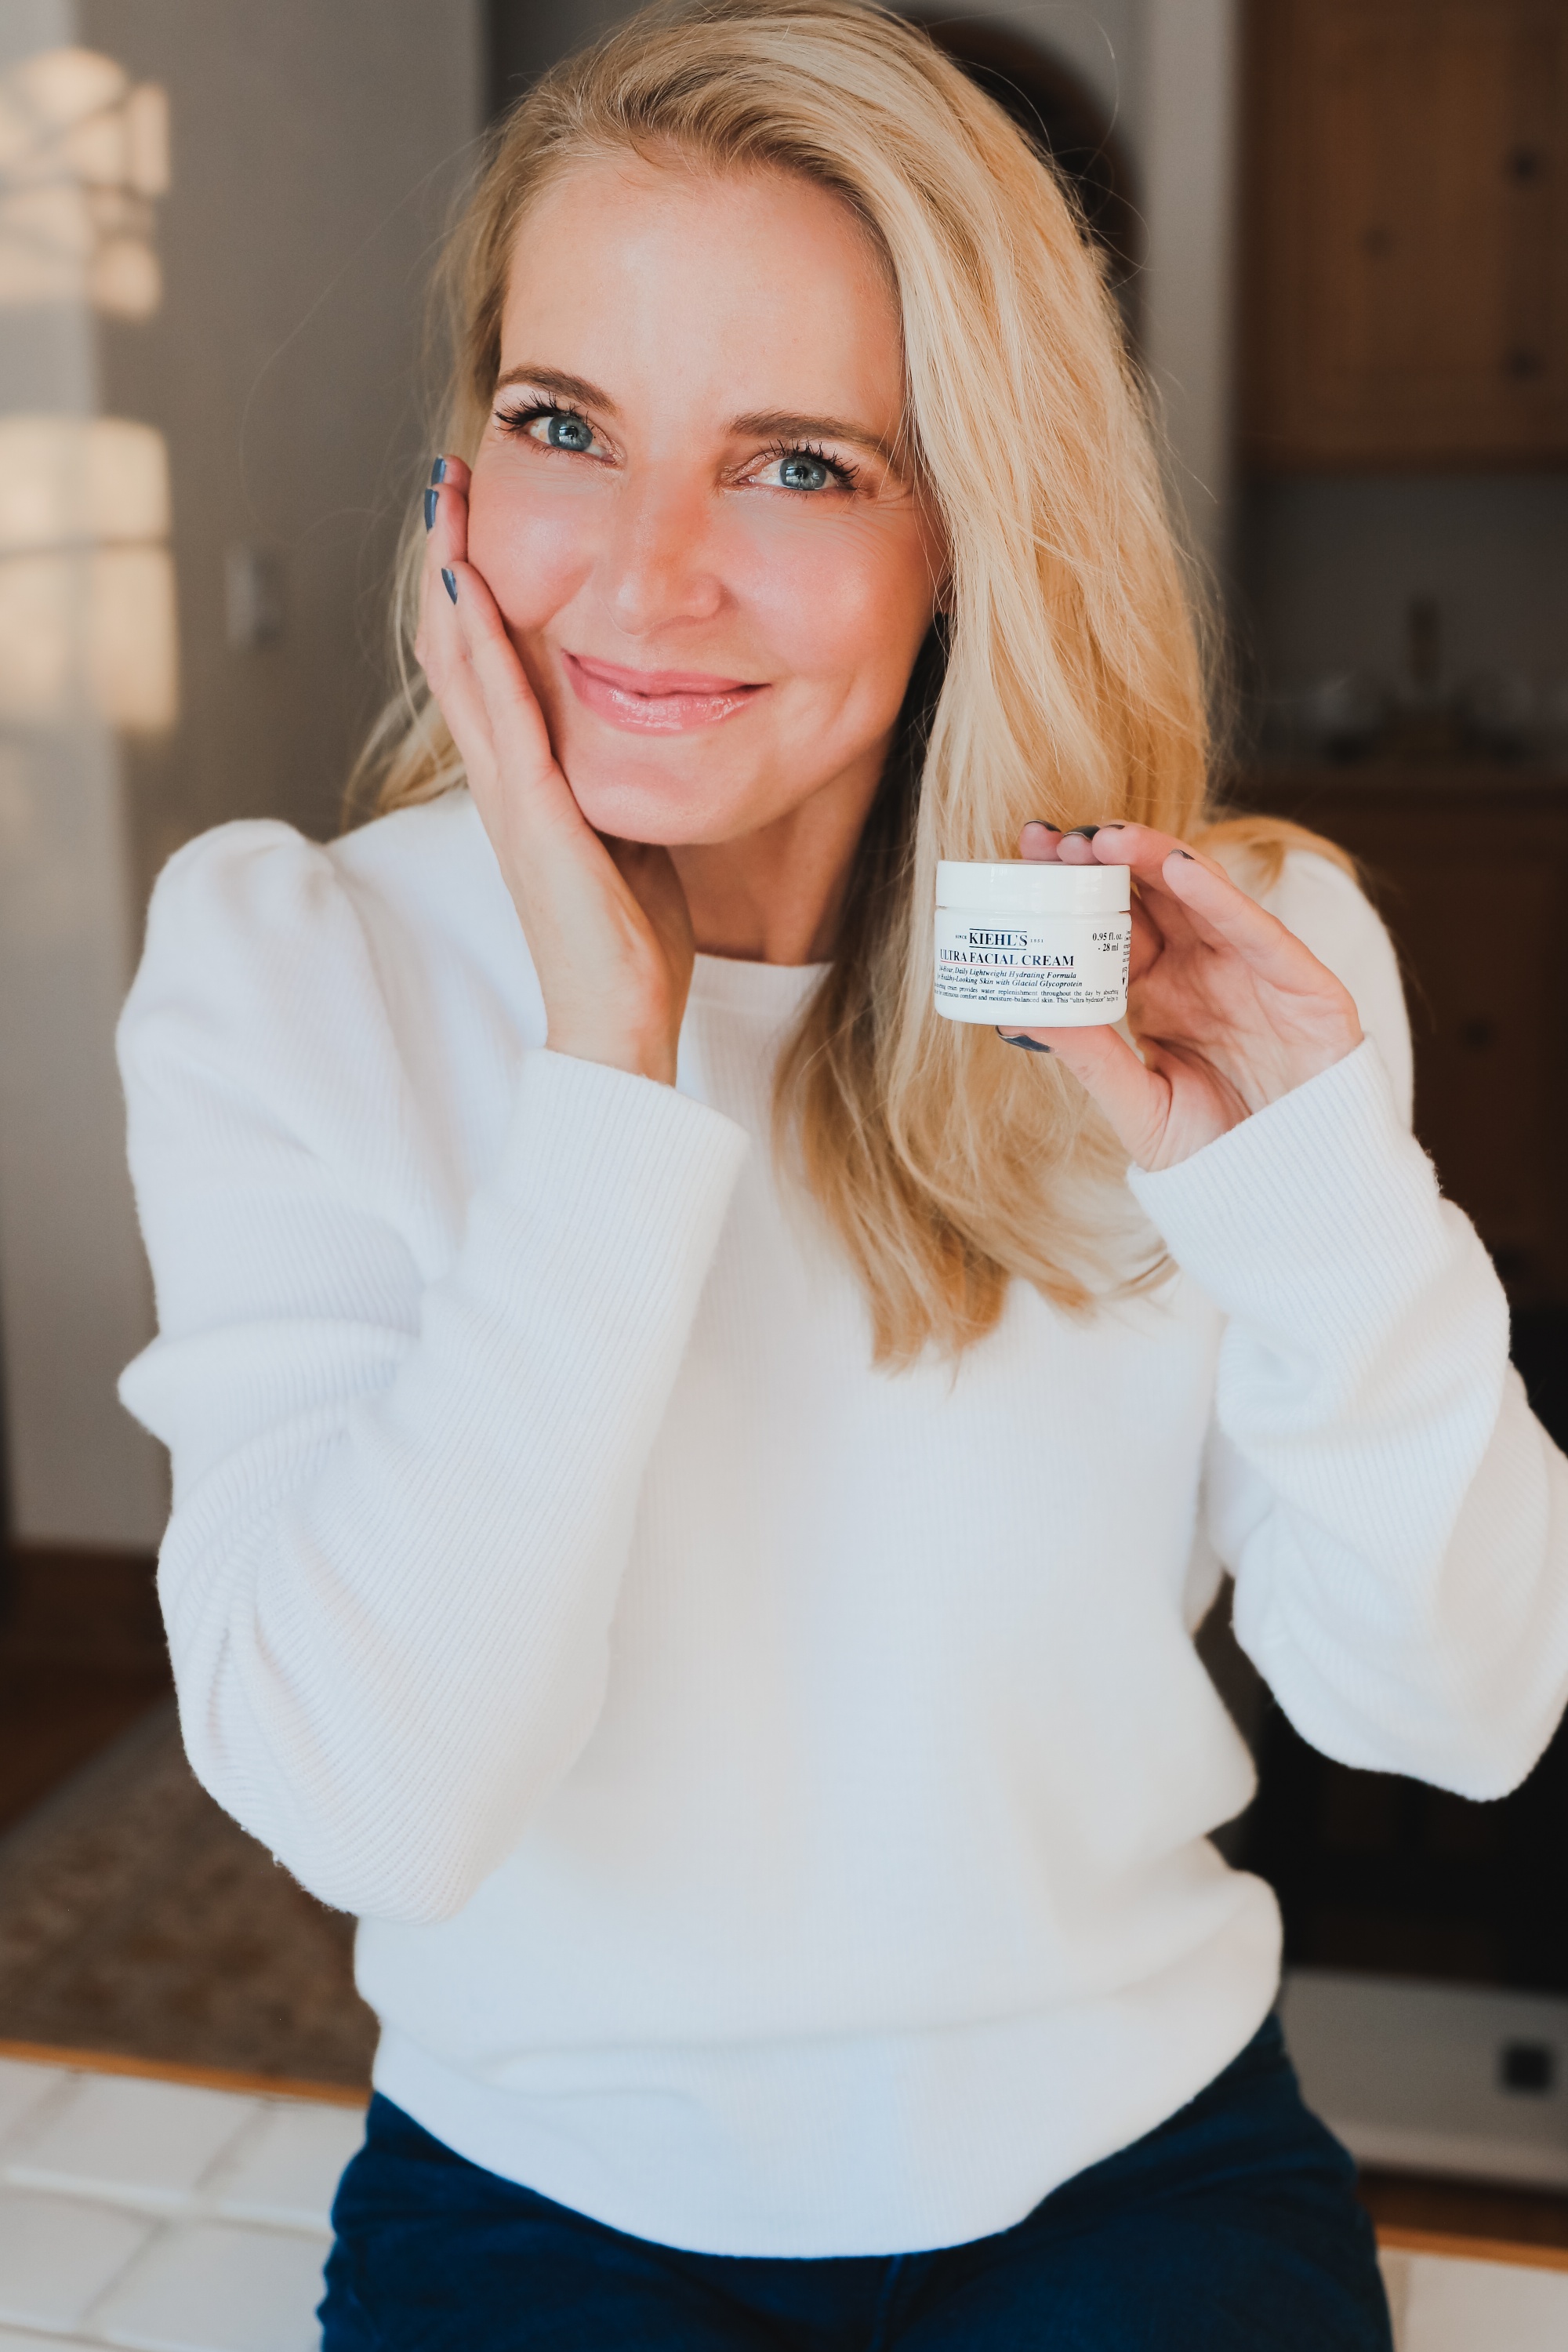 Skincare Gifts, Erin Busbee of Busbee Style using theUUltra Facial Cream by Kiehl' in Telluride, Colorado